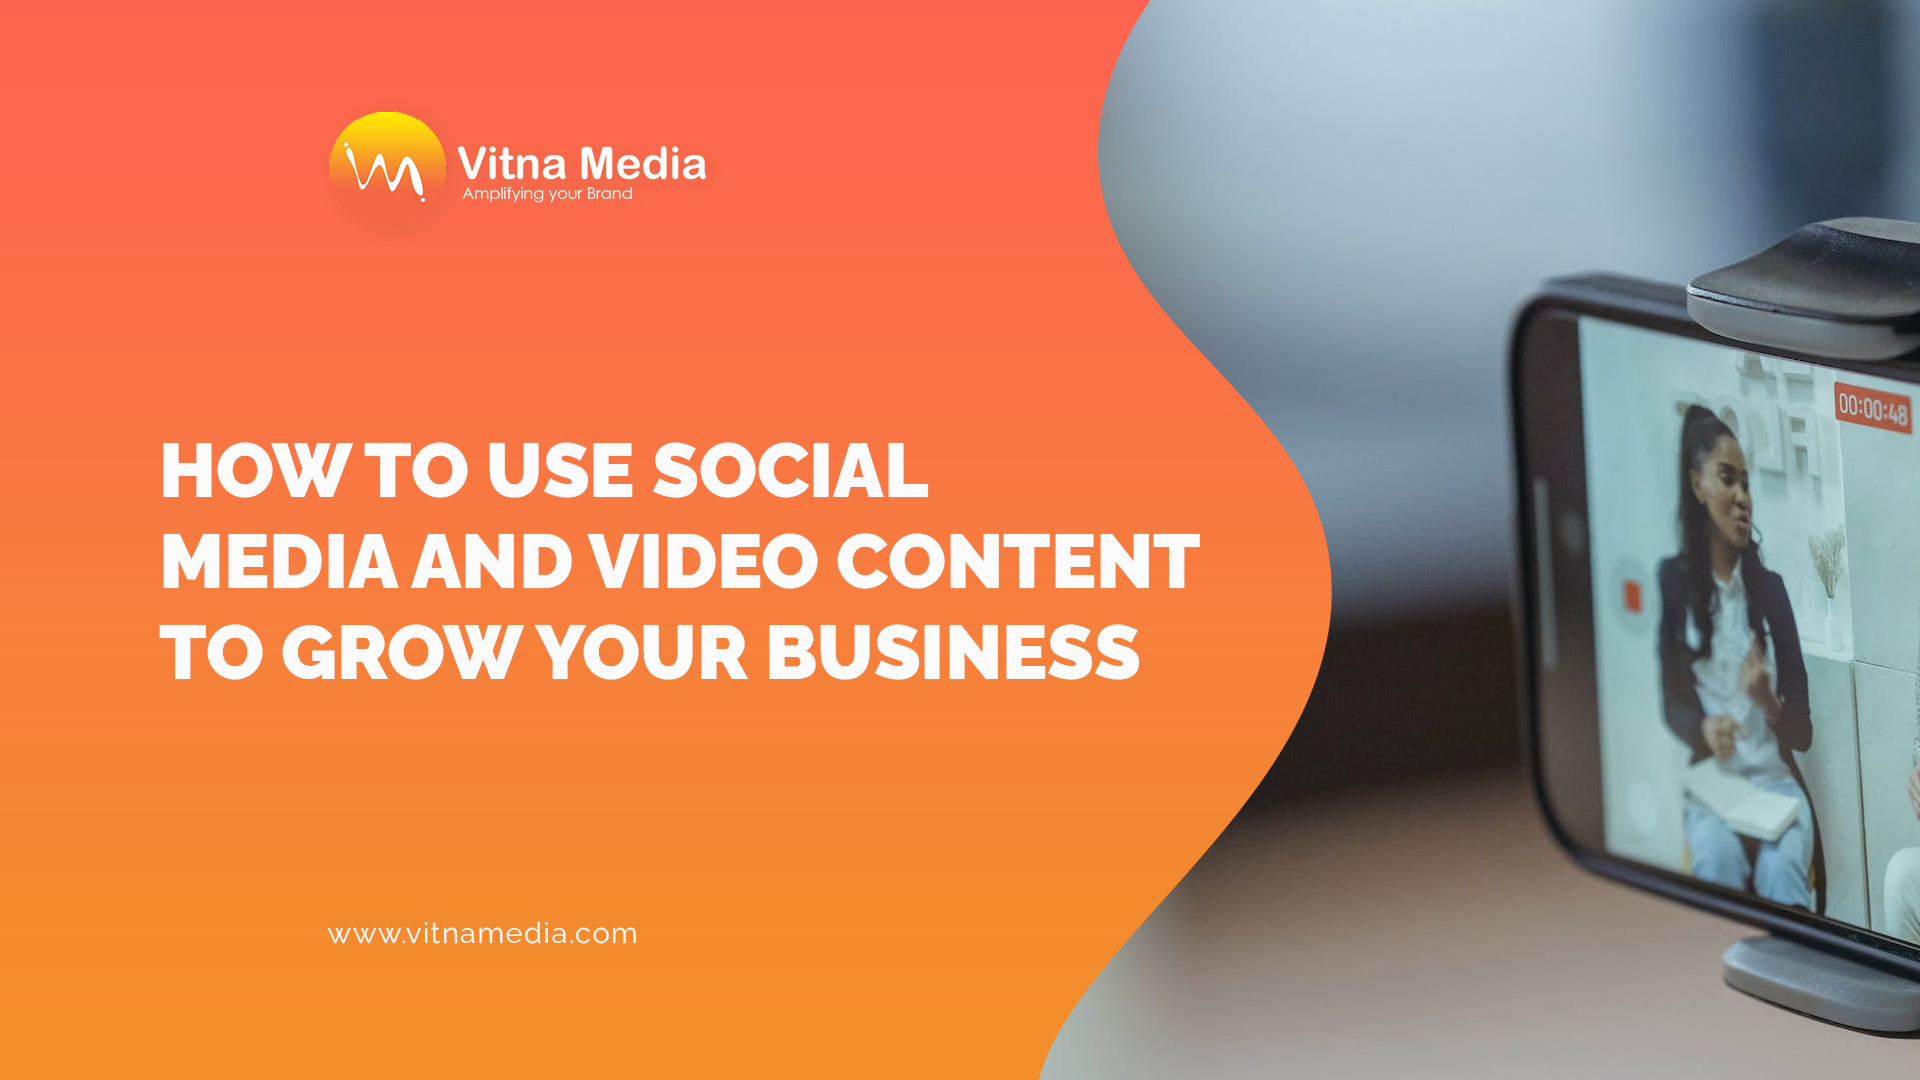 How to Use Social Media and Video Content to Grow Your Business